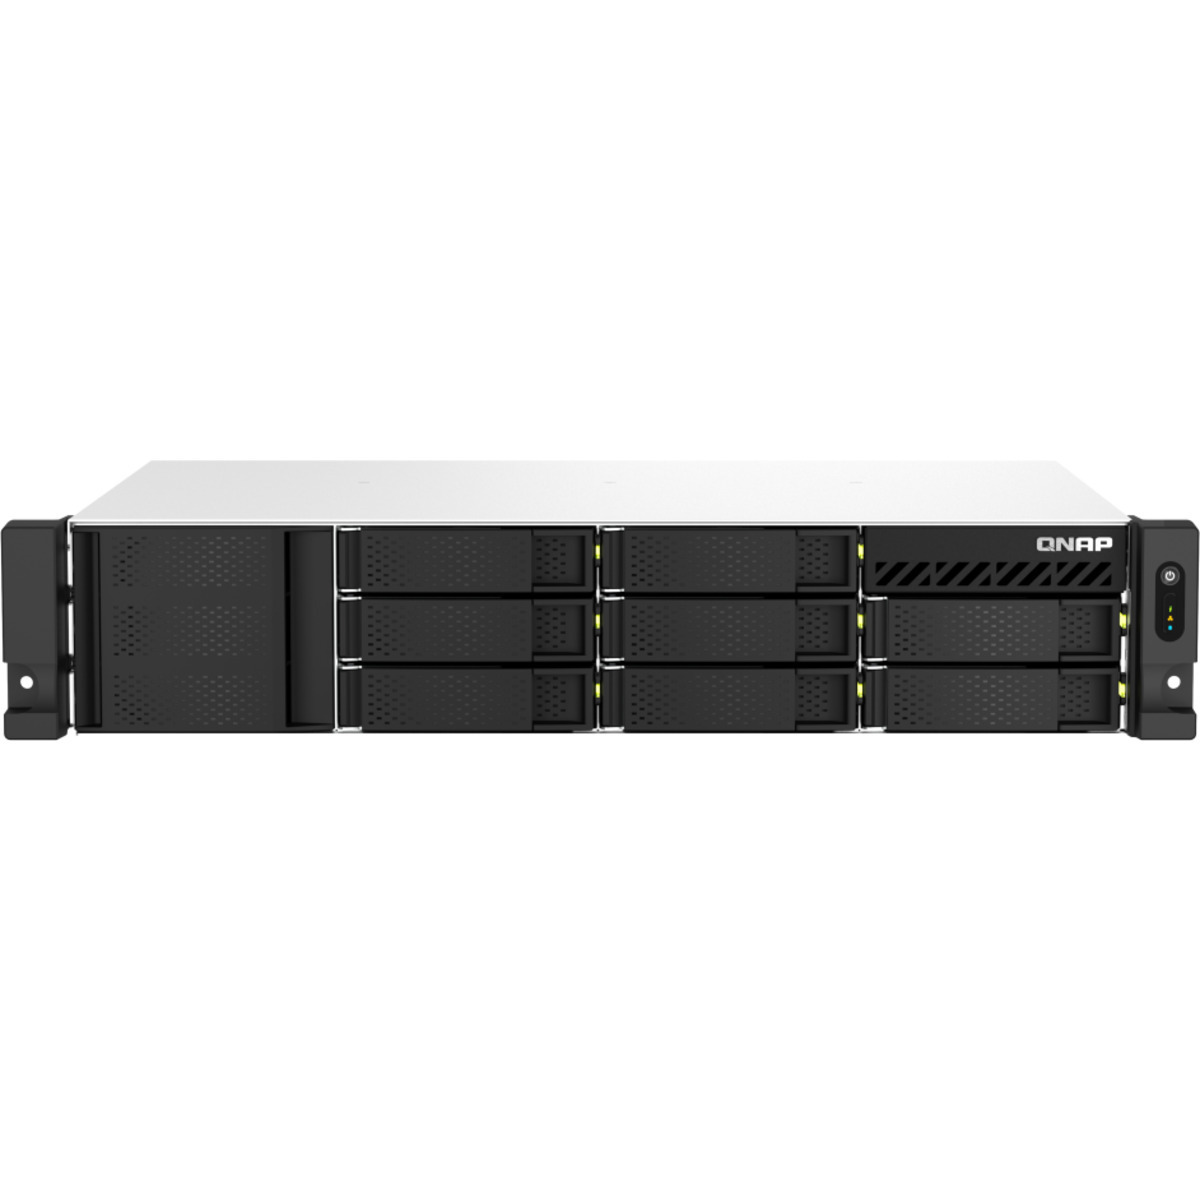 QNAP TS-873AeU 126tb 8-Bay RackMount Multimedia / Power User / Business NAS - Network Attached Storage Device 7x18tb Western Digital Red Pro WD181KFGX 3.5 7200rpm SATA 6Gb/s HDD NAS Class Drives Installed - Burn-In Tested - FREE RAM UPGRADE TS-873AeU